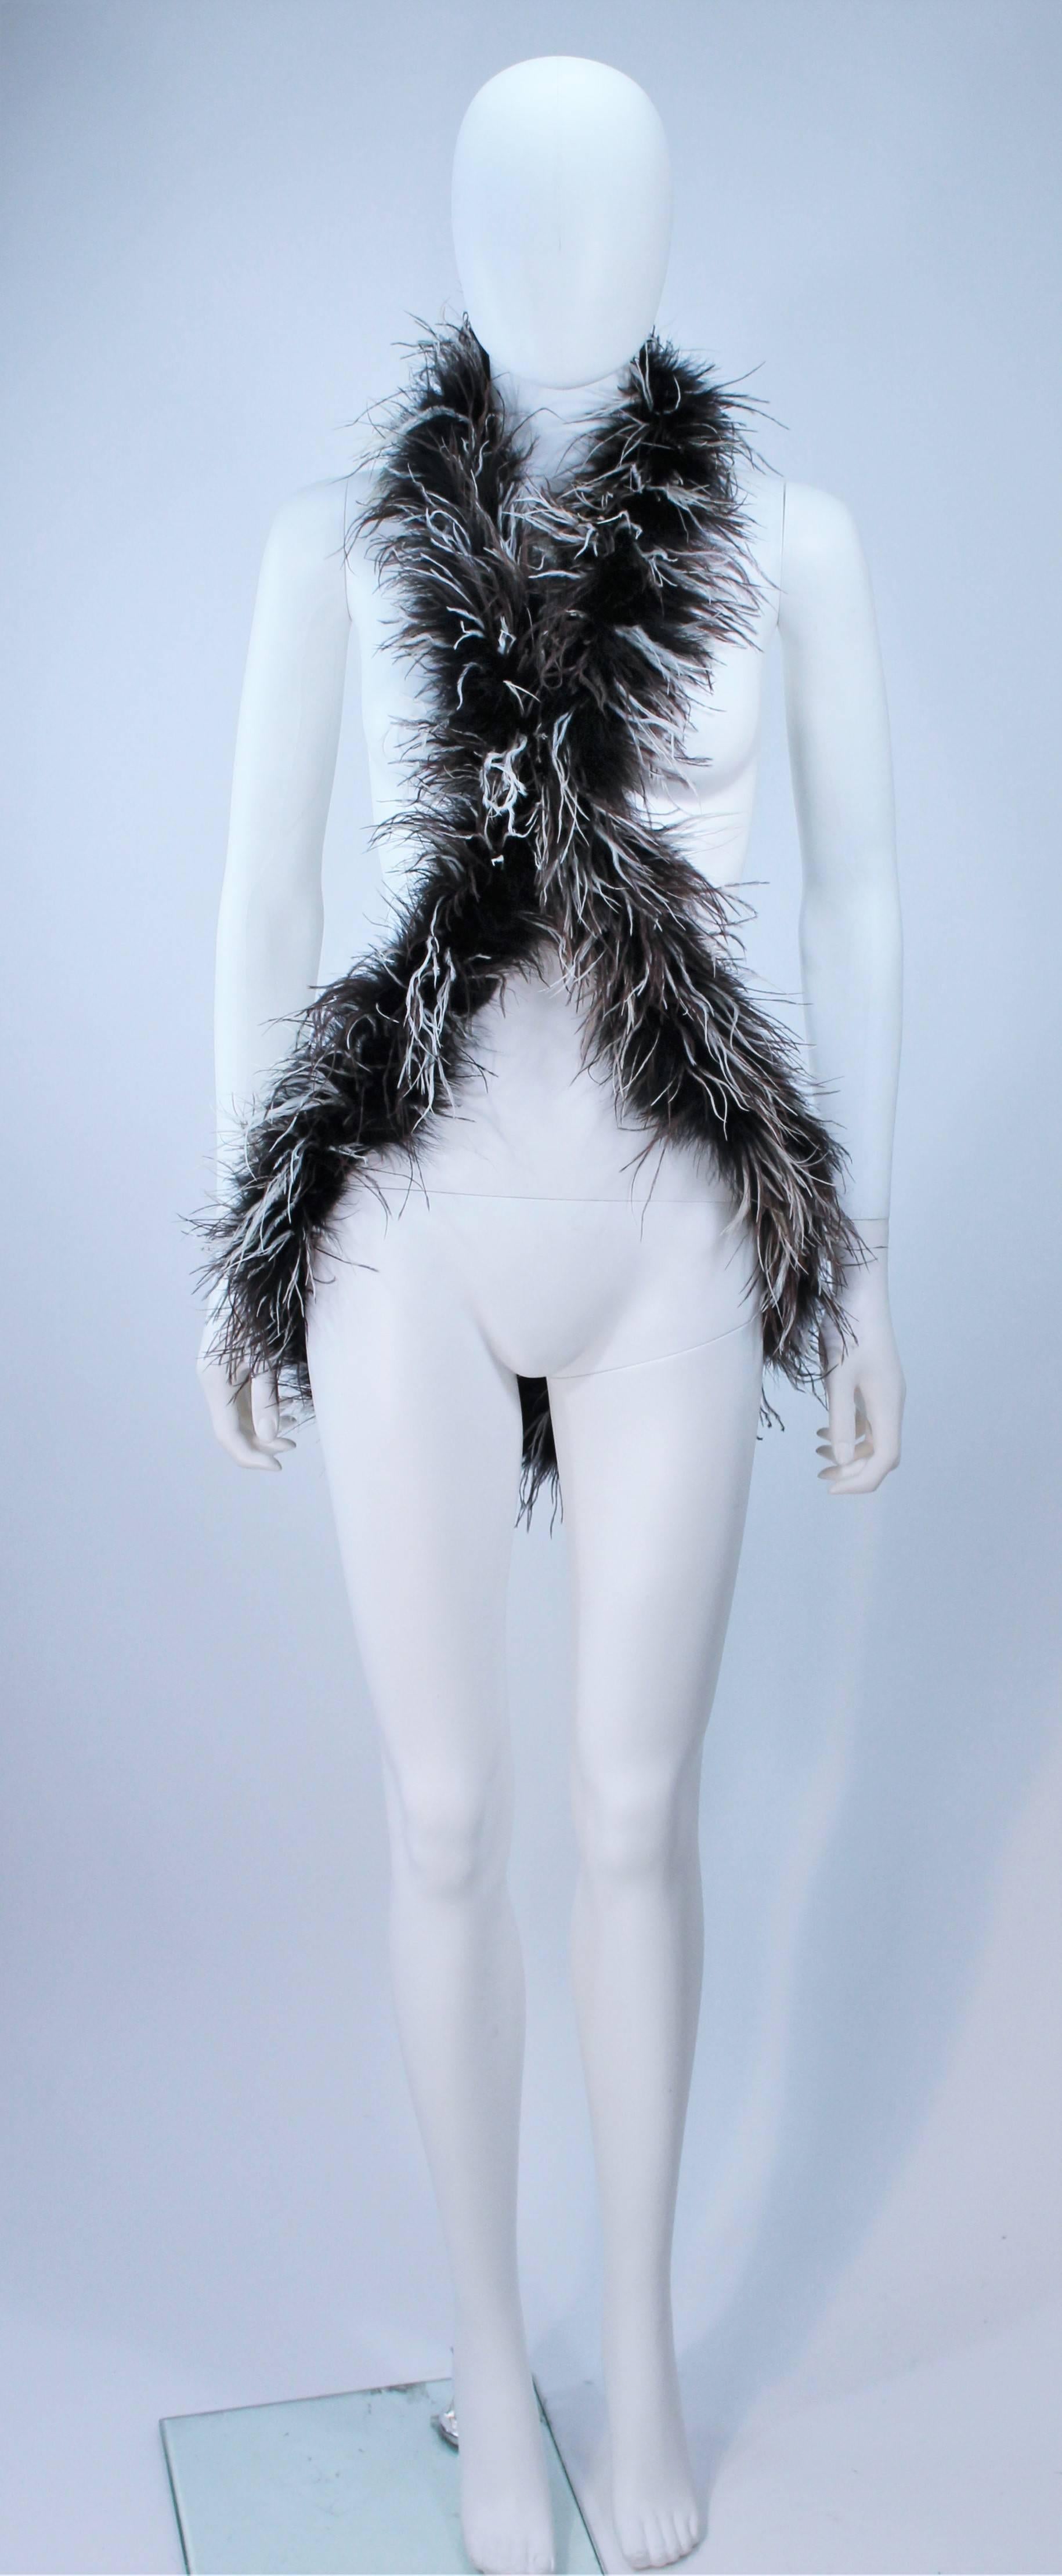 This Elizabeth Mason Couture wrap features a marabou boa that wraps around the body with a rhinestone magnetic closure. Made in Beverly Hills.

This is a couture custom order that can be made in a variety of color combinations. Please allow for a 60